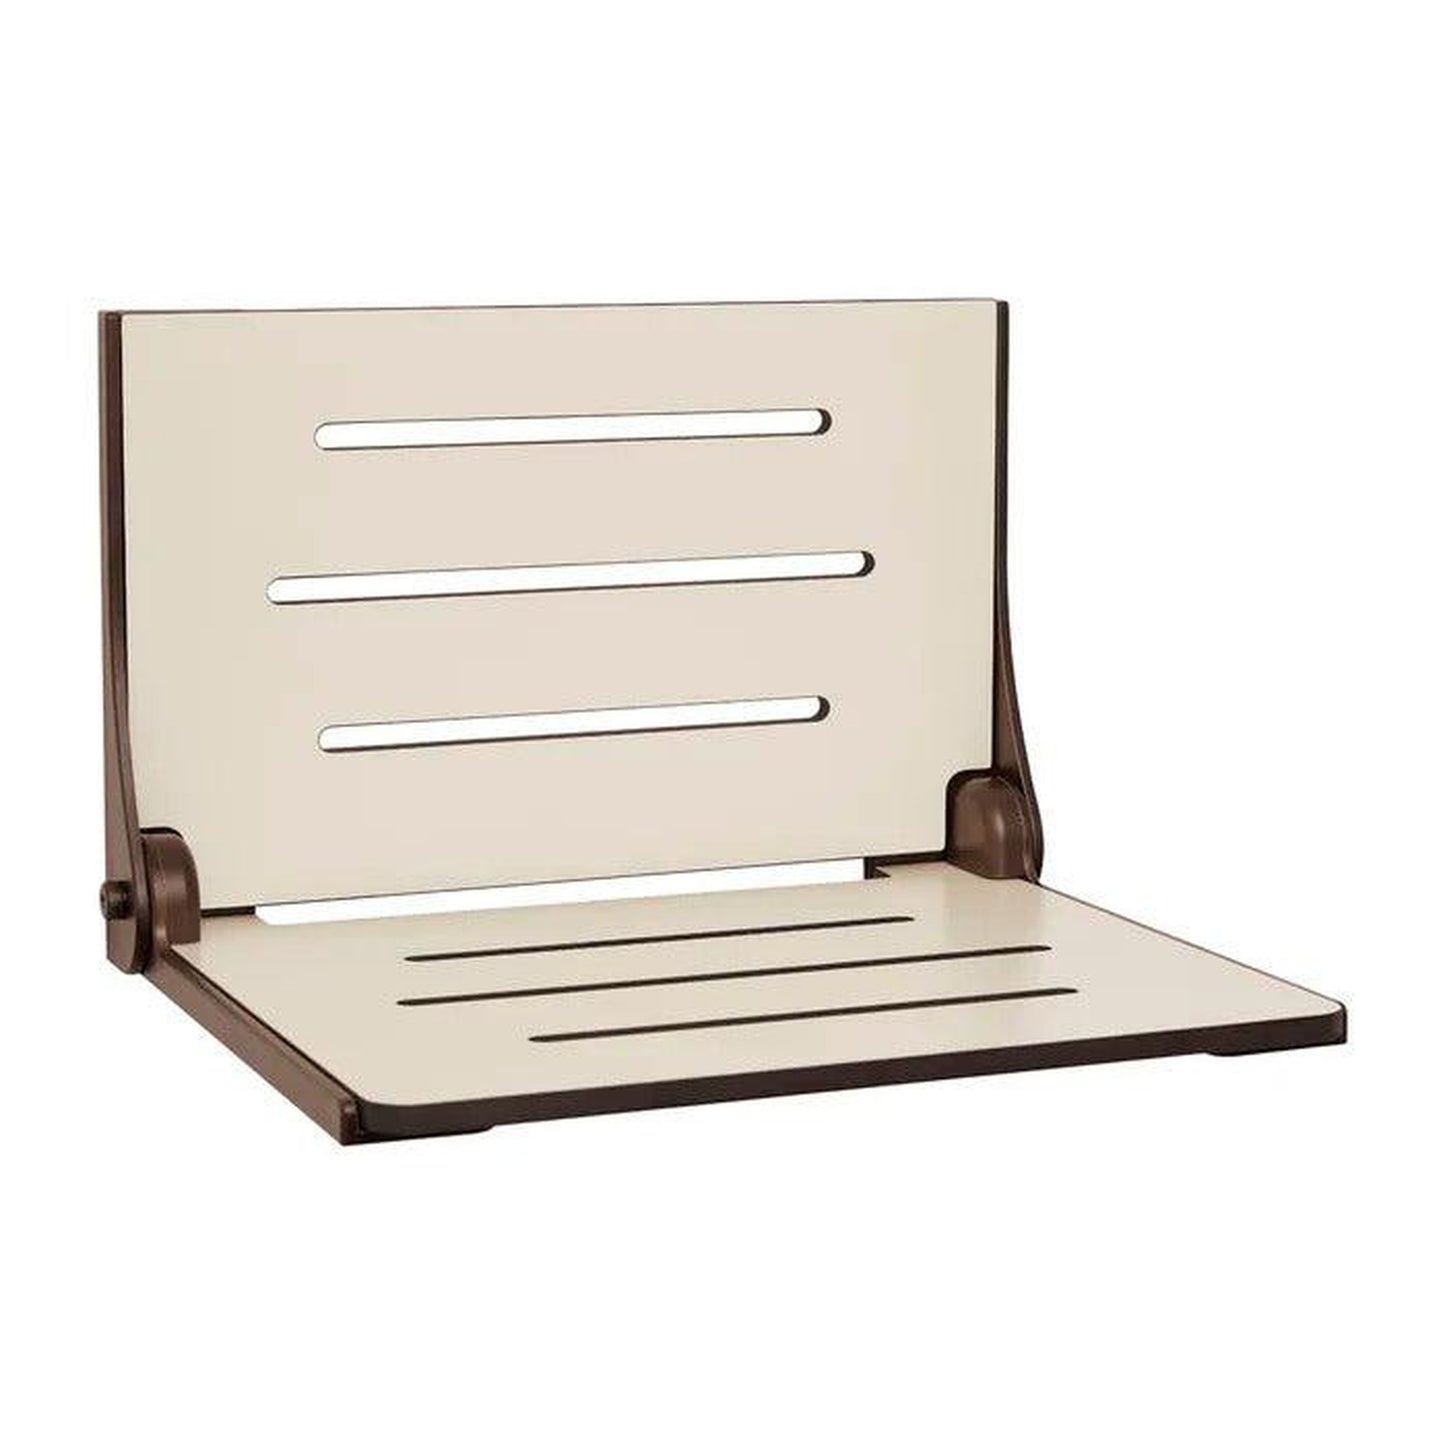 Seachrome Silhouette 19" Phenolic Almond Seat Top and Bronze Frame Wall Mounted High Back Shower Seat